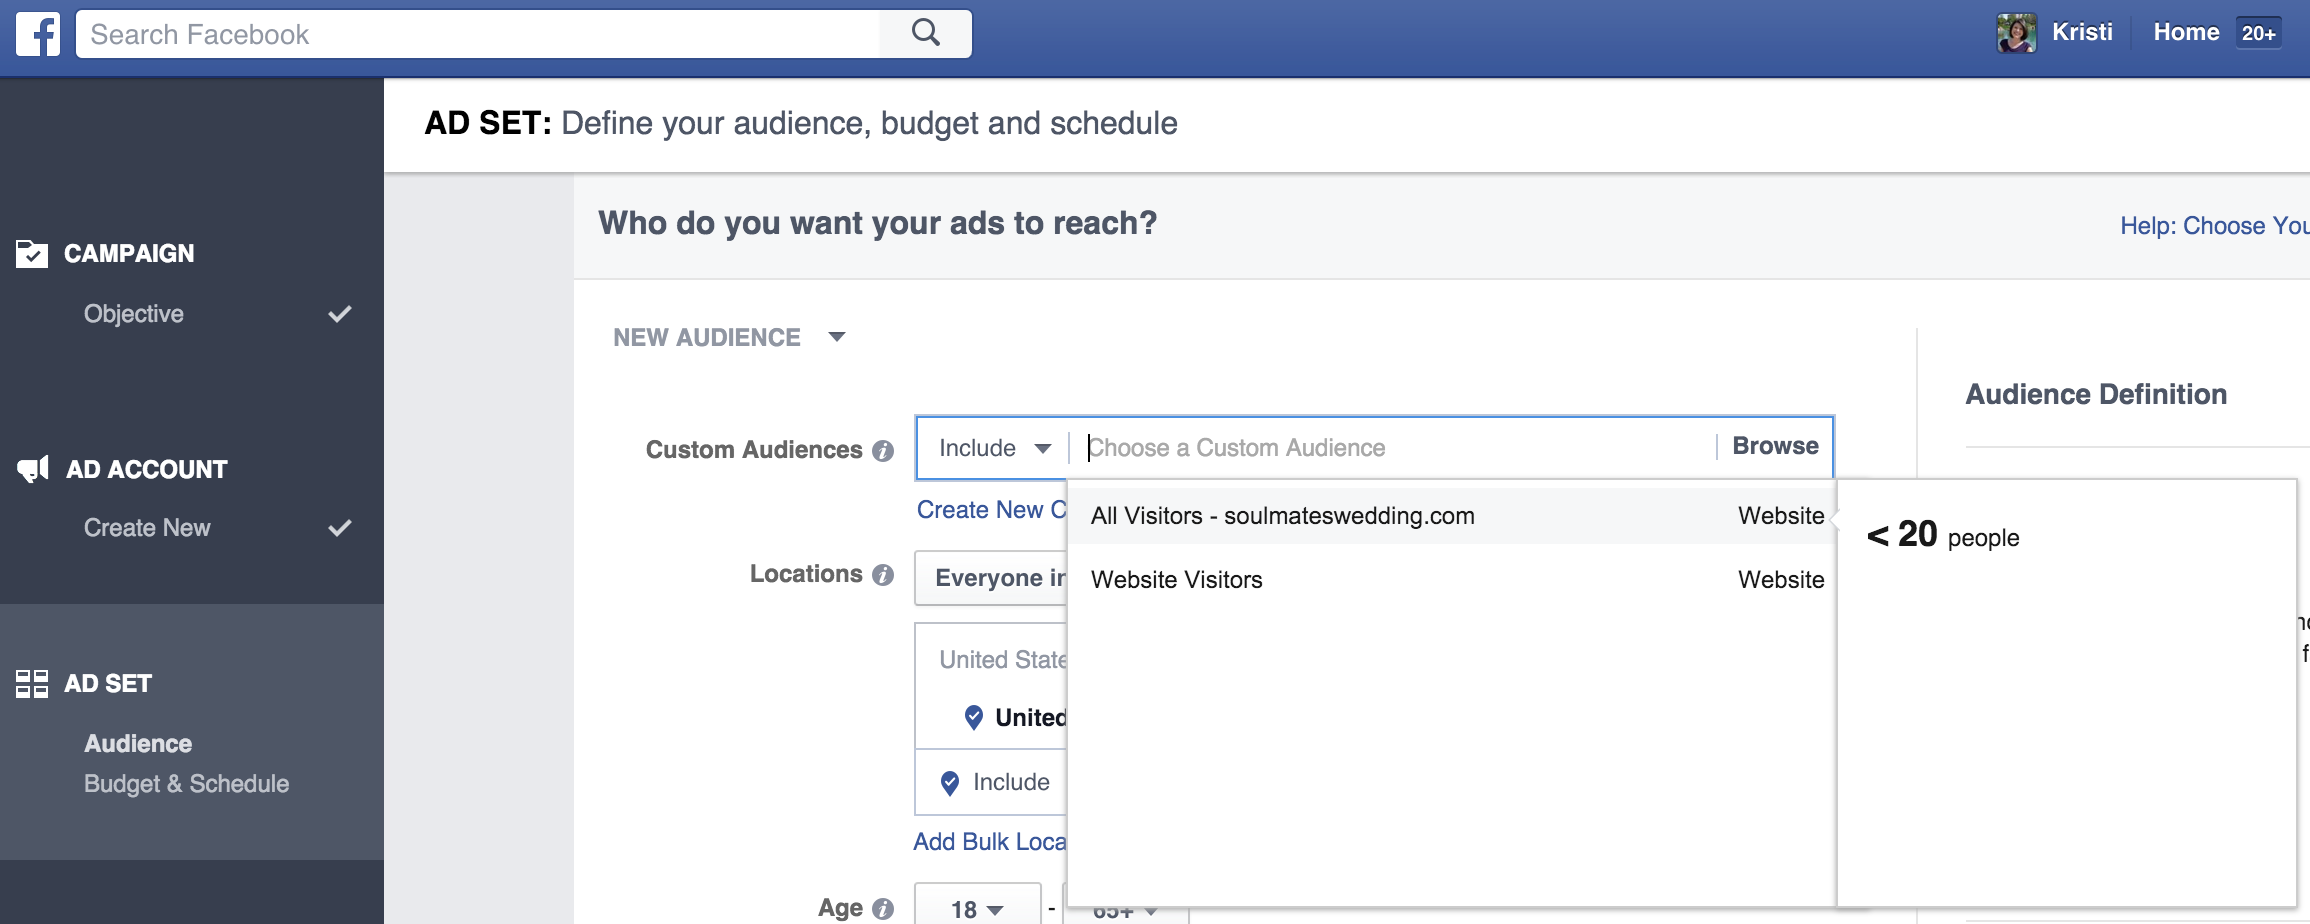 Facebook Ad audience